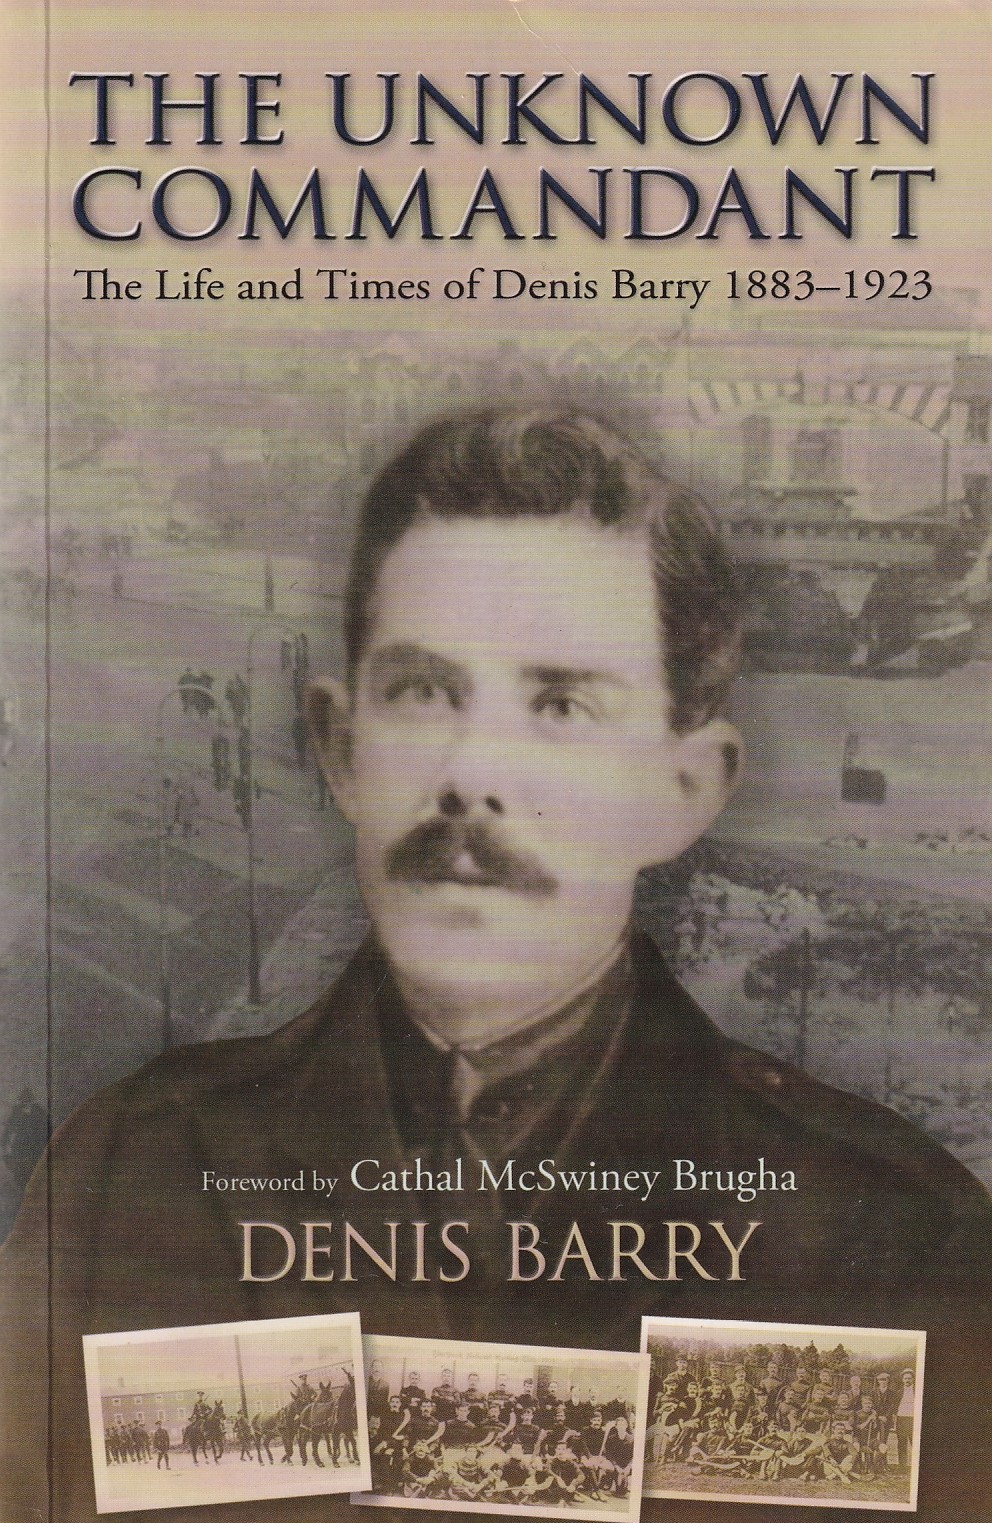 The Unknown Commandant: The Life and Times of Denis Barry 1883-1923 by Dennis Barry